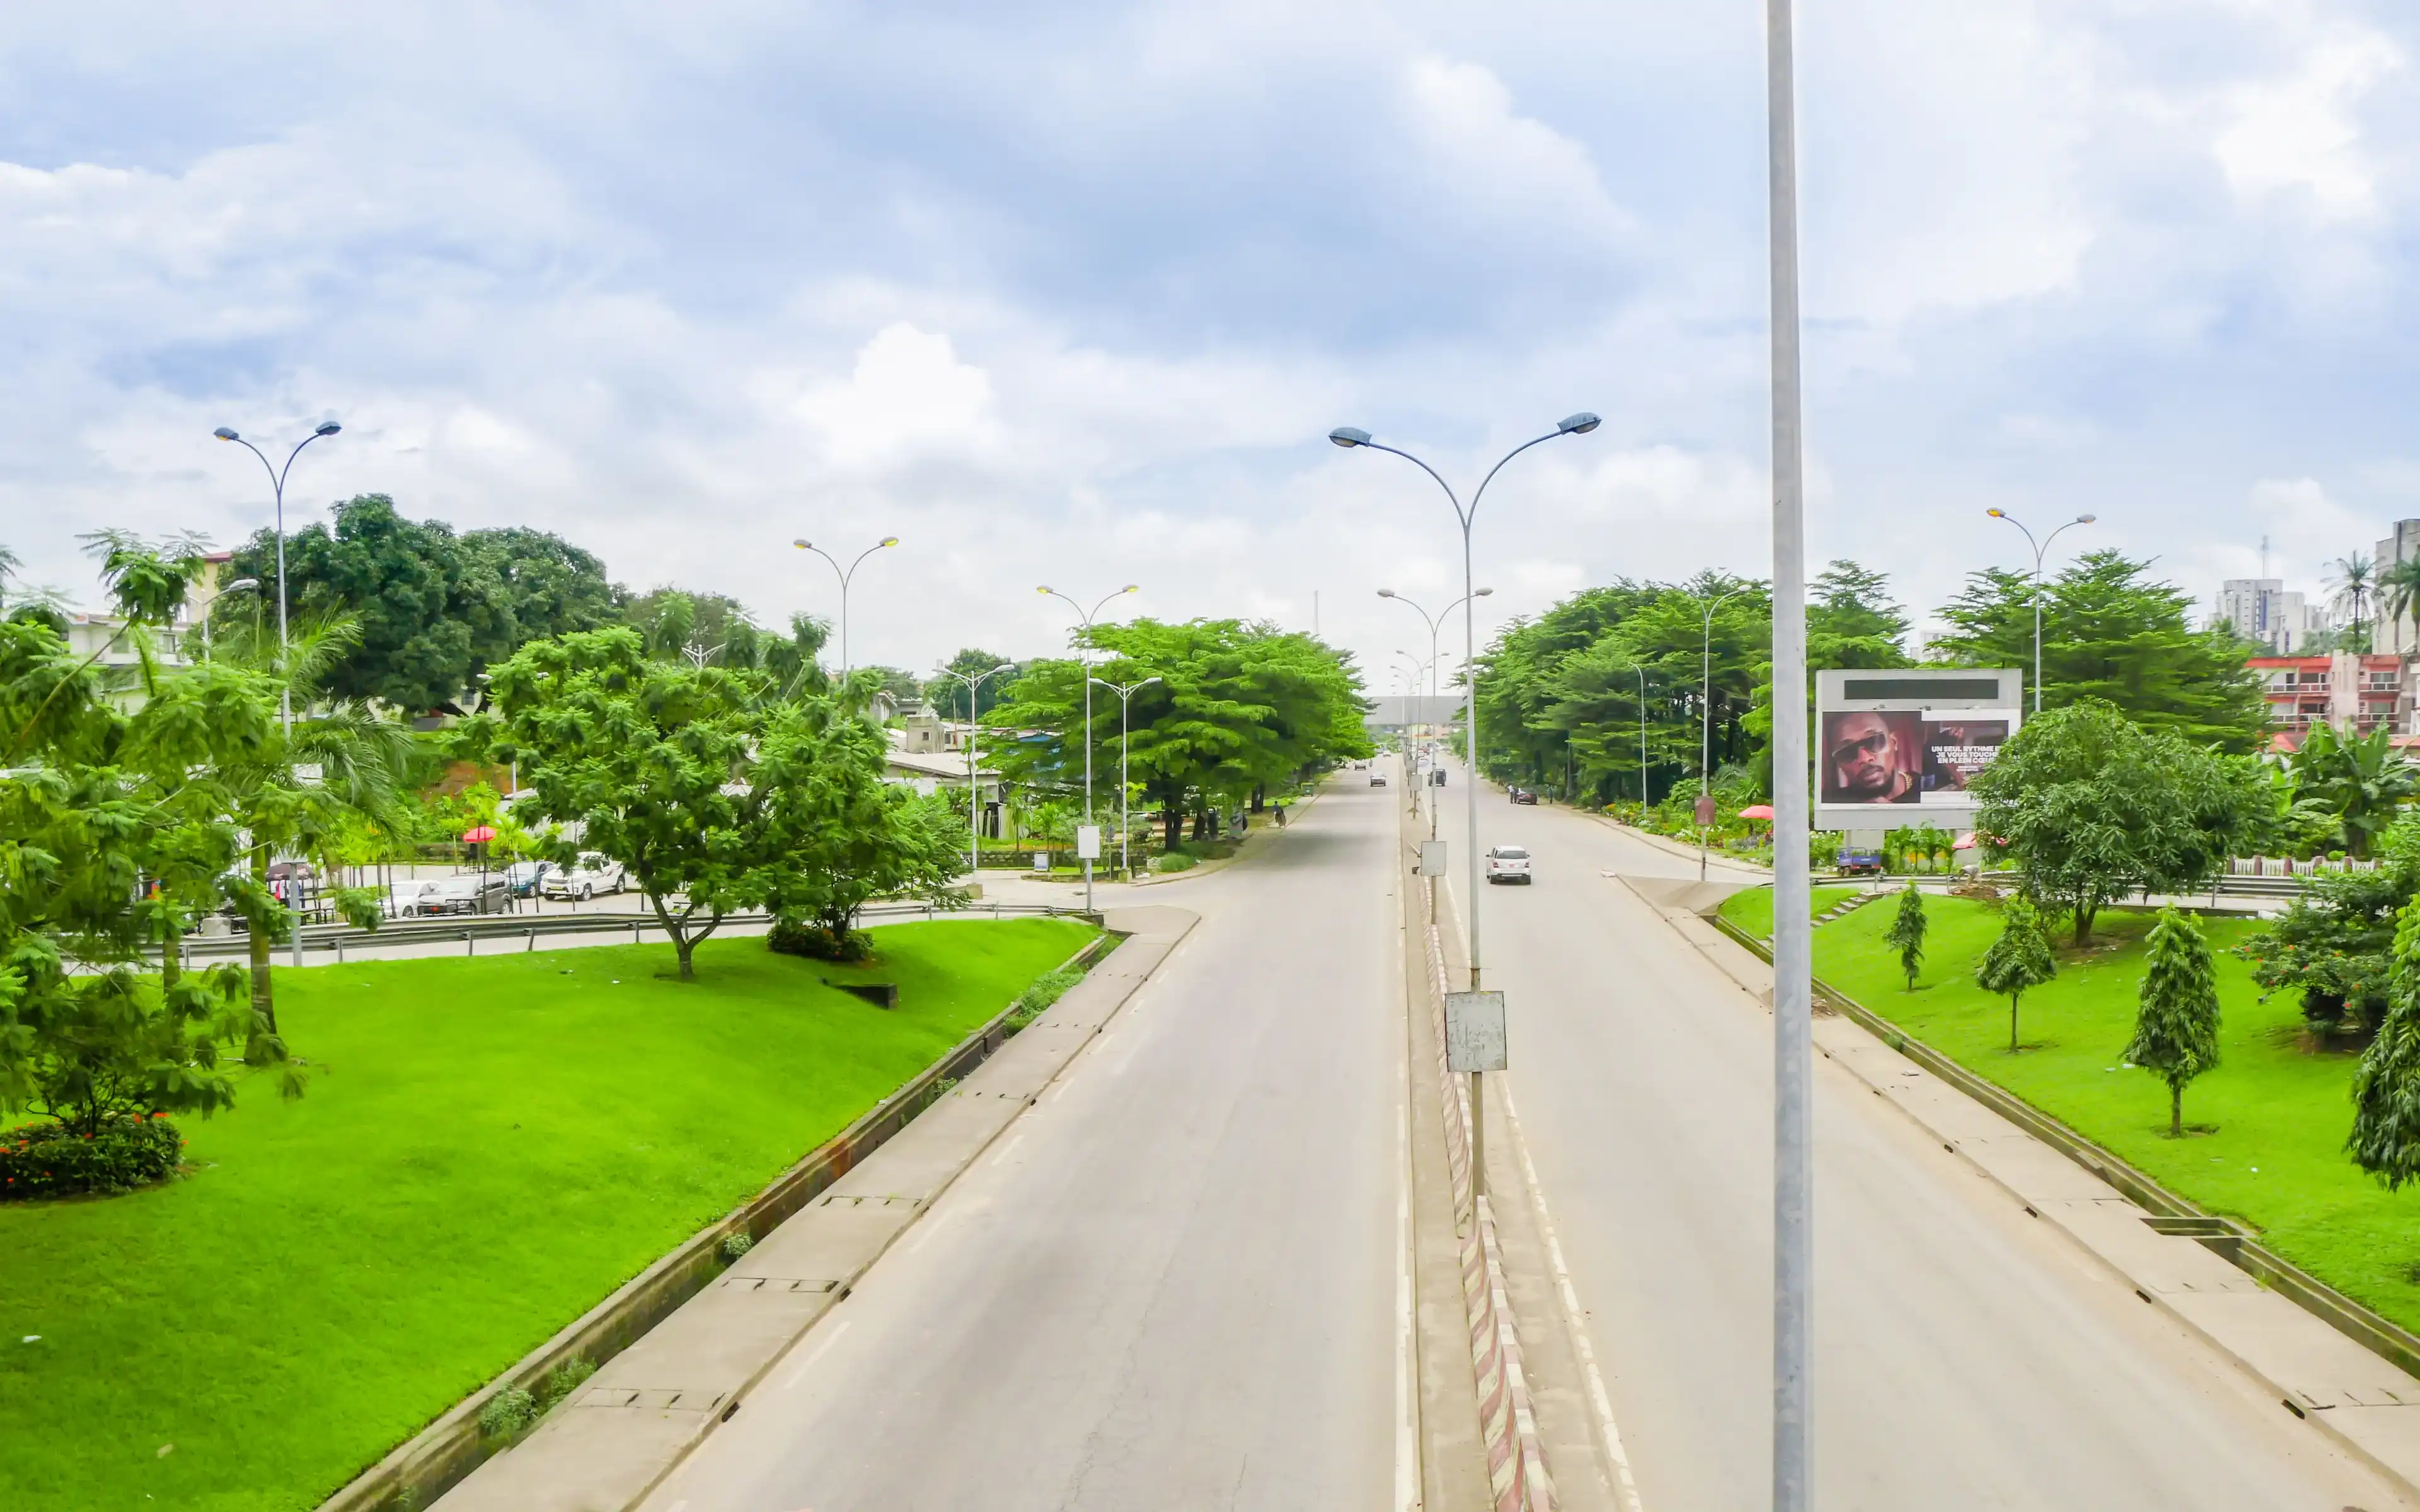 Douala, Littoral/Cameroon - 11/12/2019 : Beautiful view on the main boulevard leading to the Douala port and Bonanjo, the administrative district of the city of Douala in Cameroon.